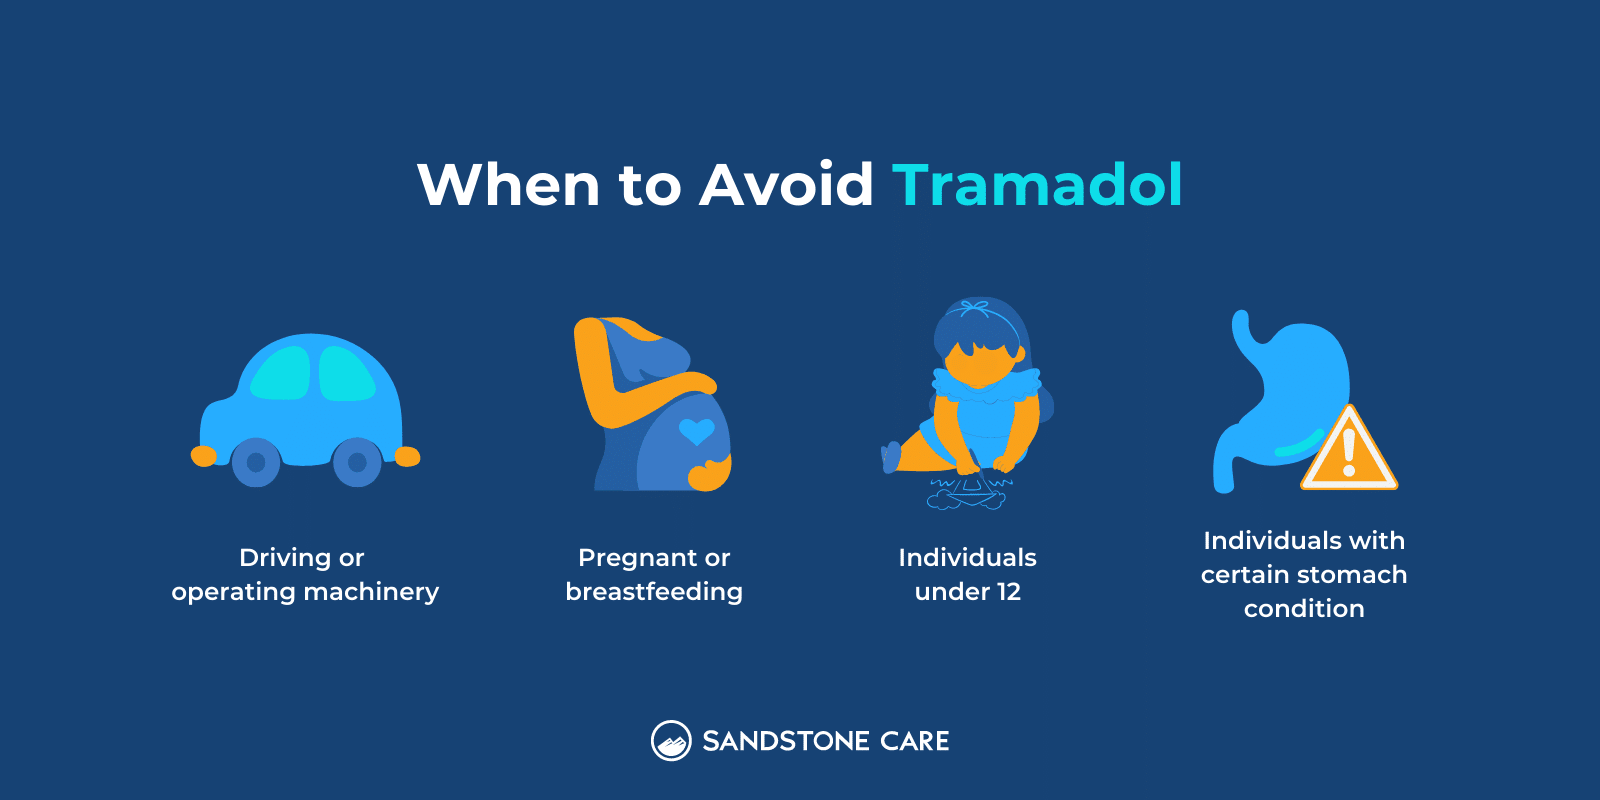 When to Avoid Tramadol text written on top of list item and relevant illustration: Driving or operating machinery, pregnant or breastfeeding, individuals under 12, individuals with certain stomach condition